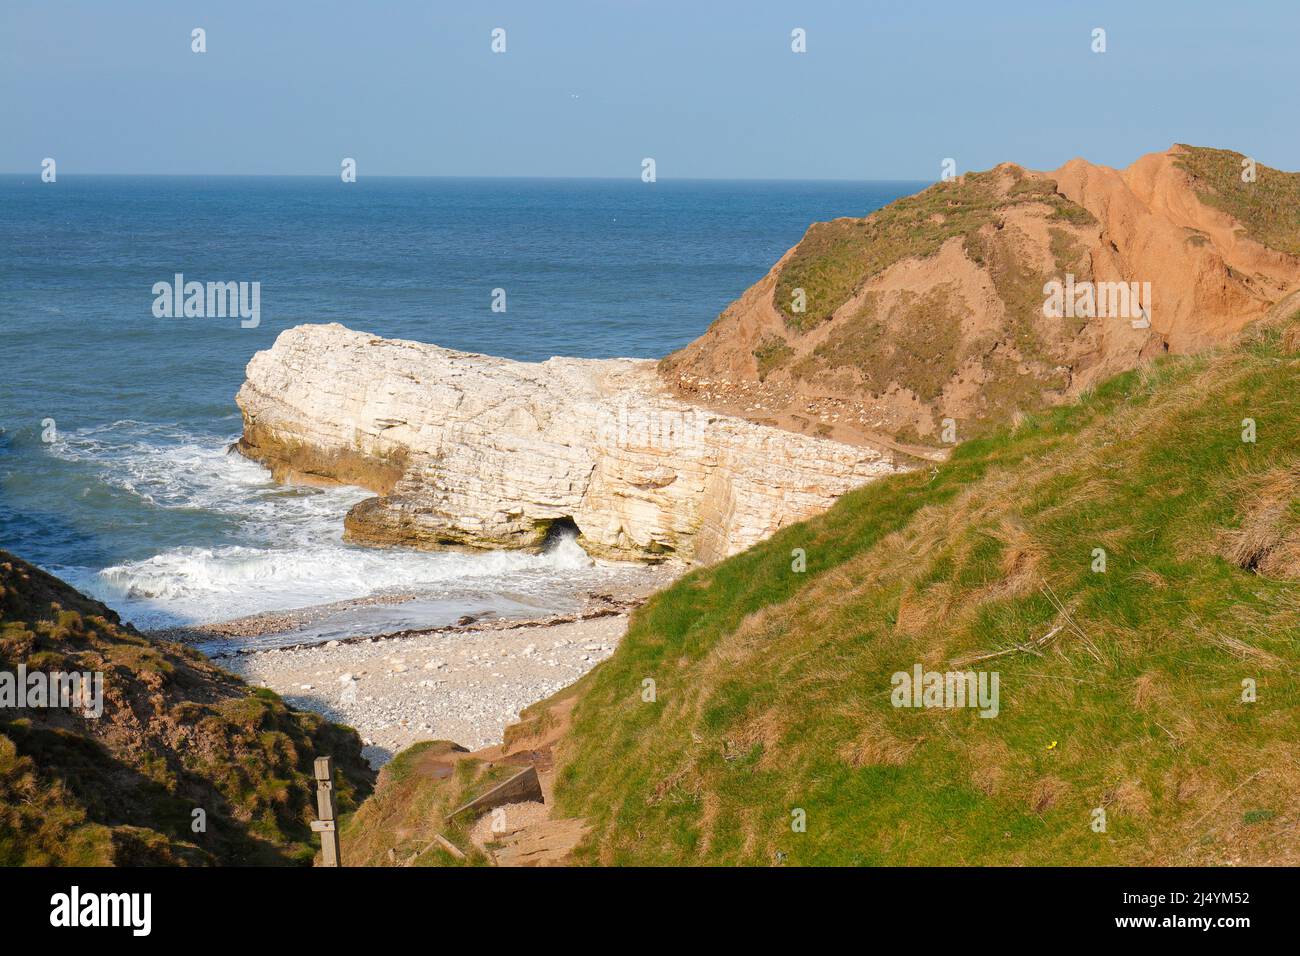 A rock at Little Thornwick Bay on the Yorkshire Coast near Flamborough that resembles a Tortoise Stock Photo